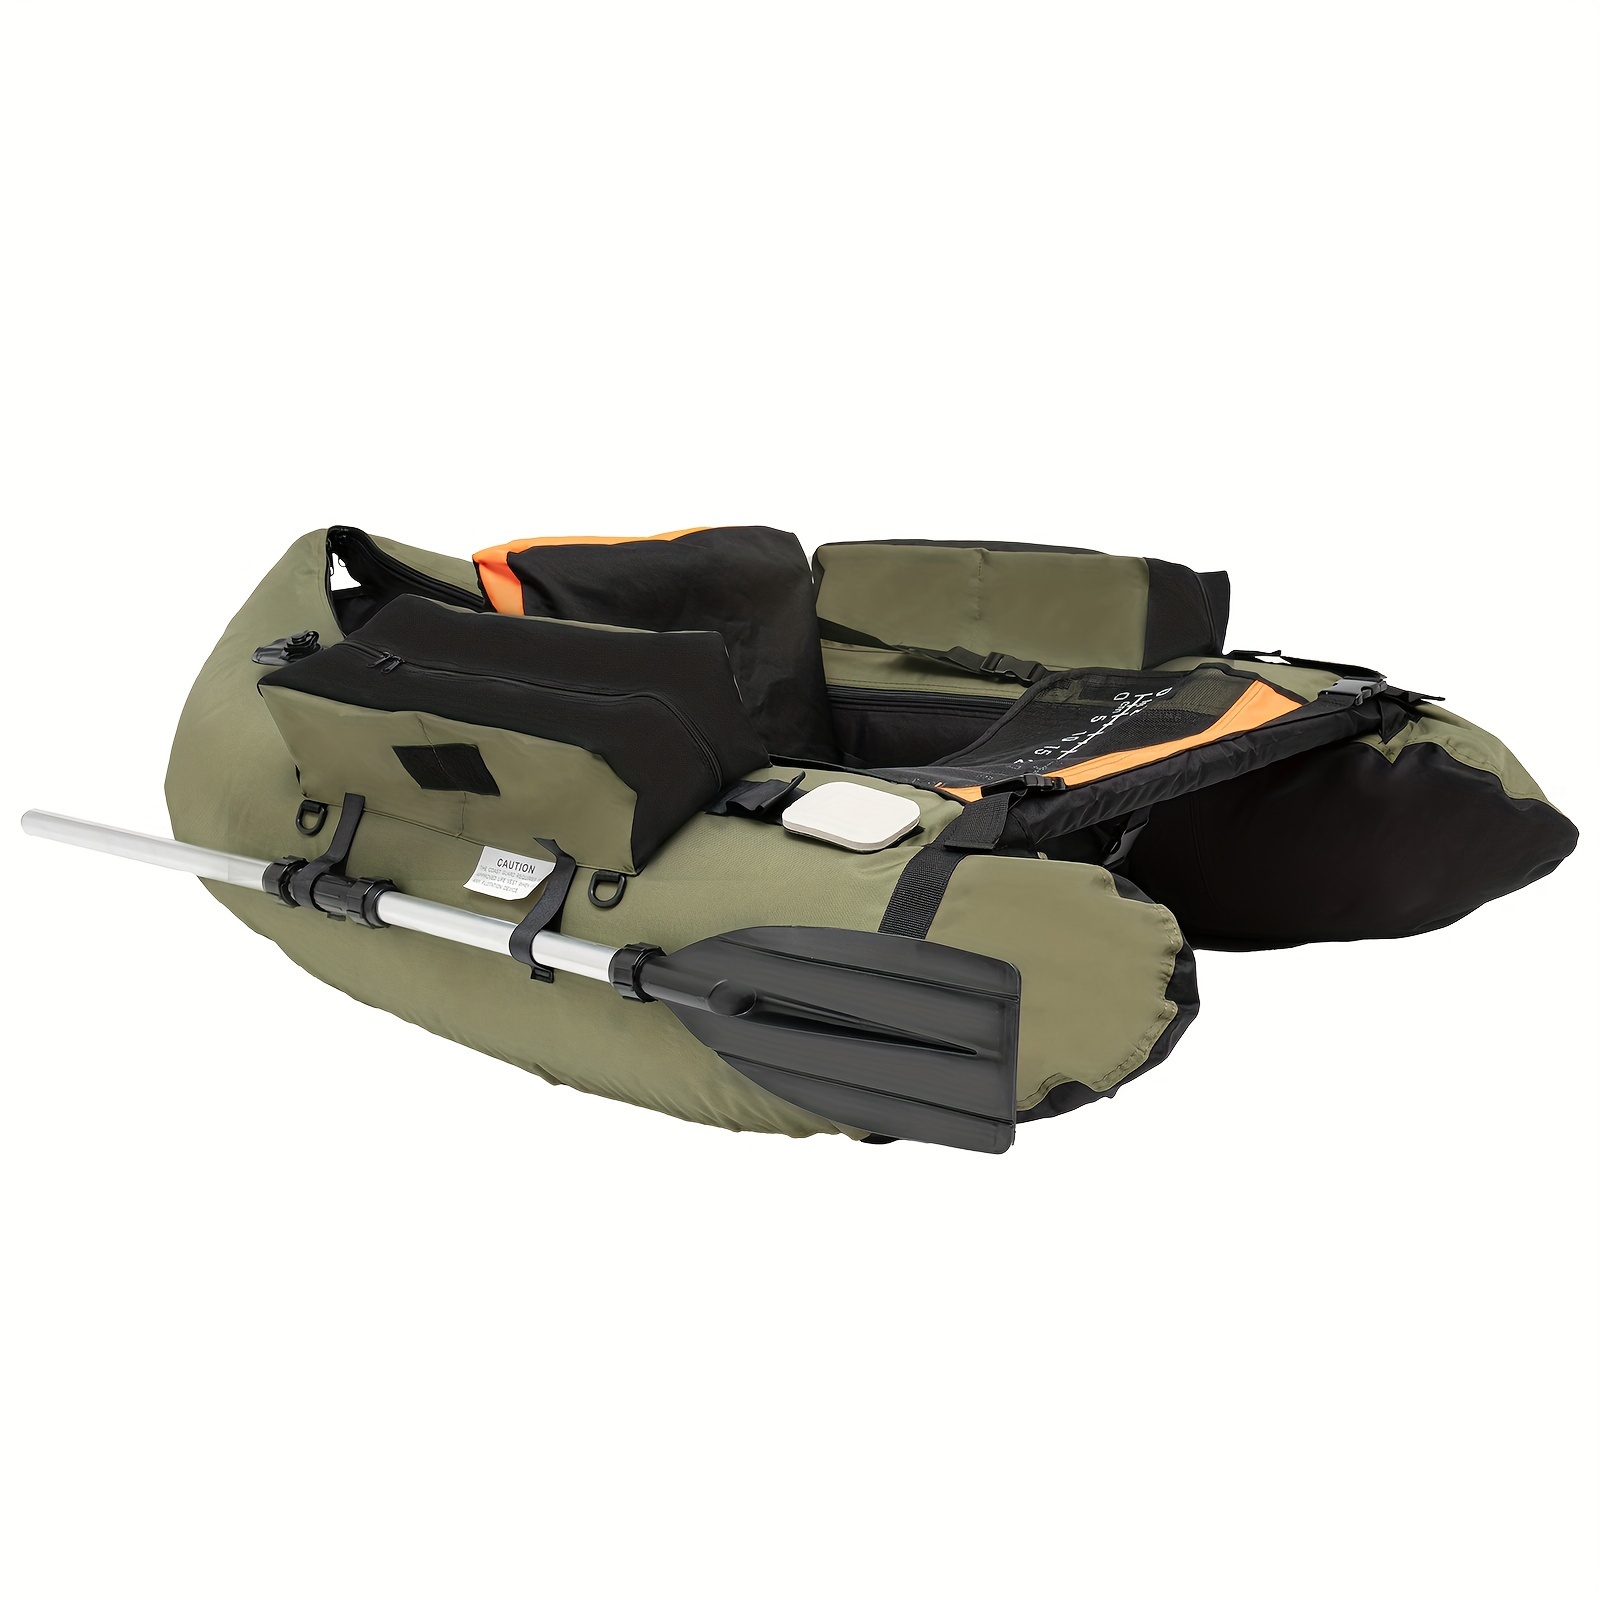 Outdoor Inflatable Portable Fishing Boat Used In Oceans Lakes Rivers And  Creeks For Rafting Exploring And Other Waters Or Activities Boat Parts  Accessories, High-quality & Affordable